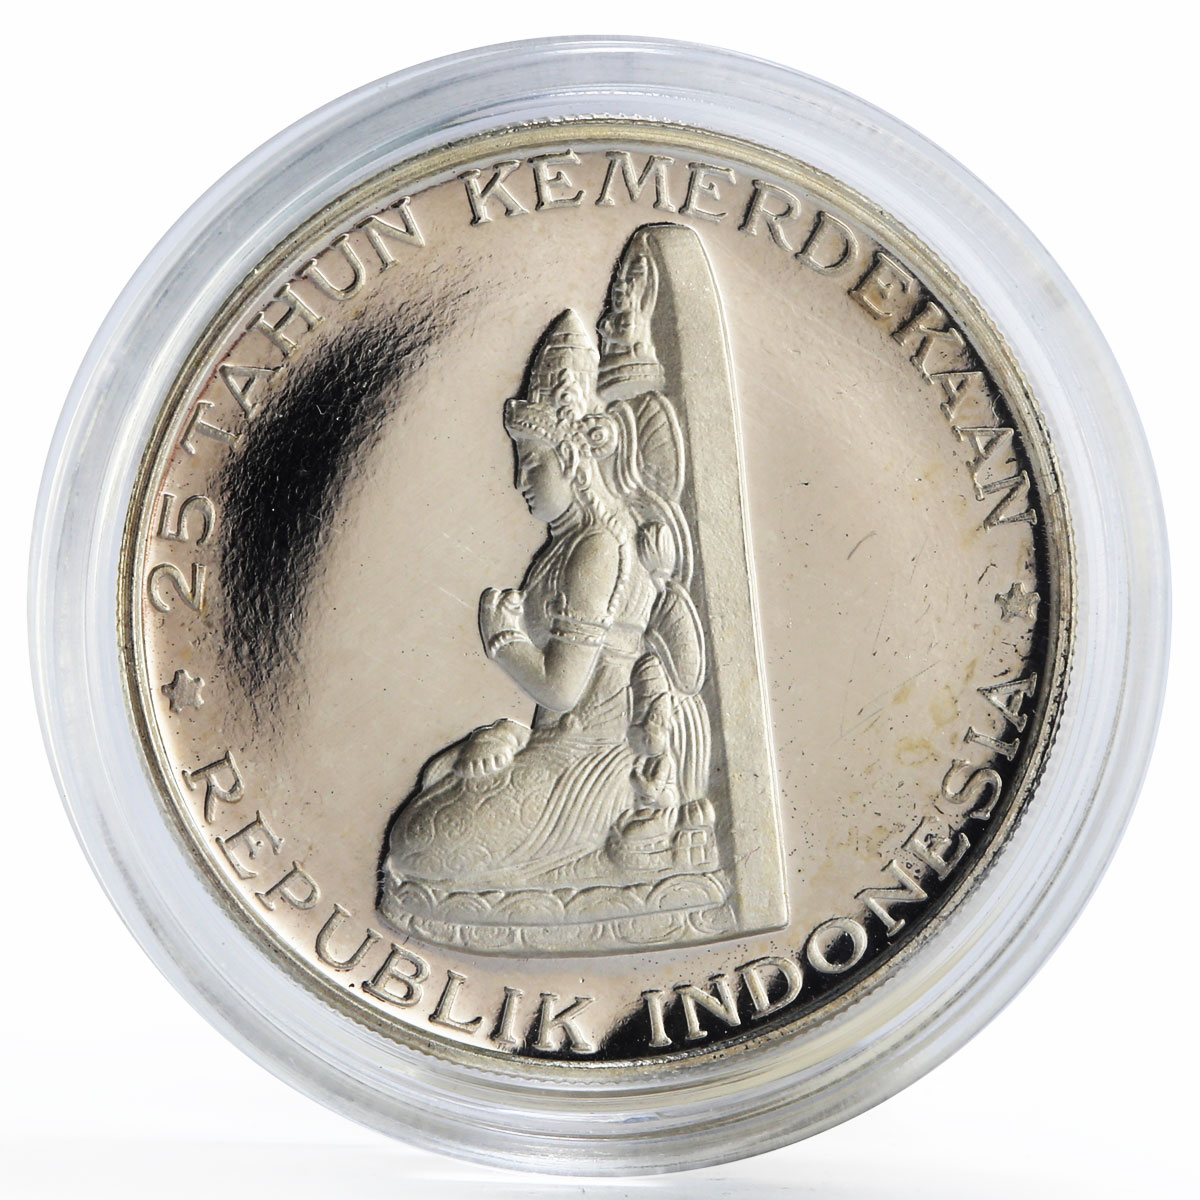 Indonesia 250 rupiah 25th Anniversary of Independence proof silver coin 1970